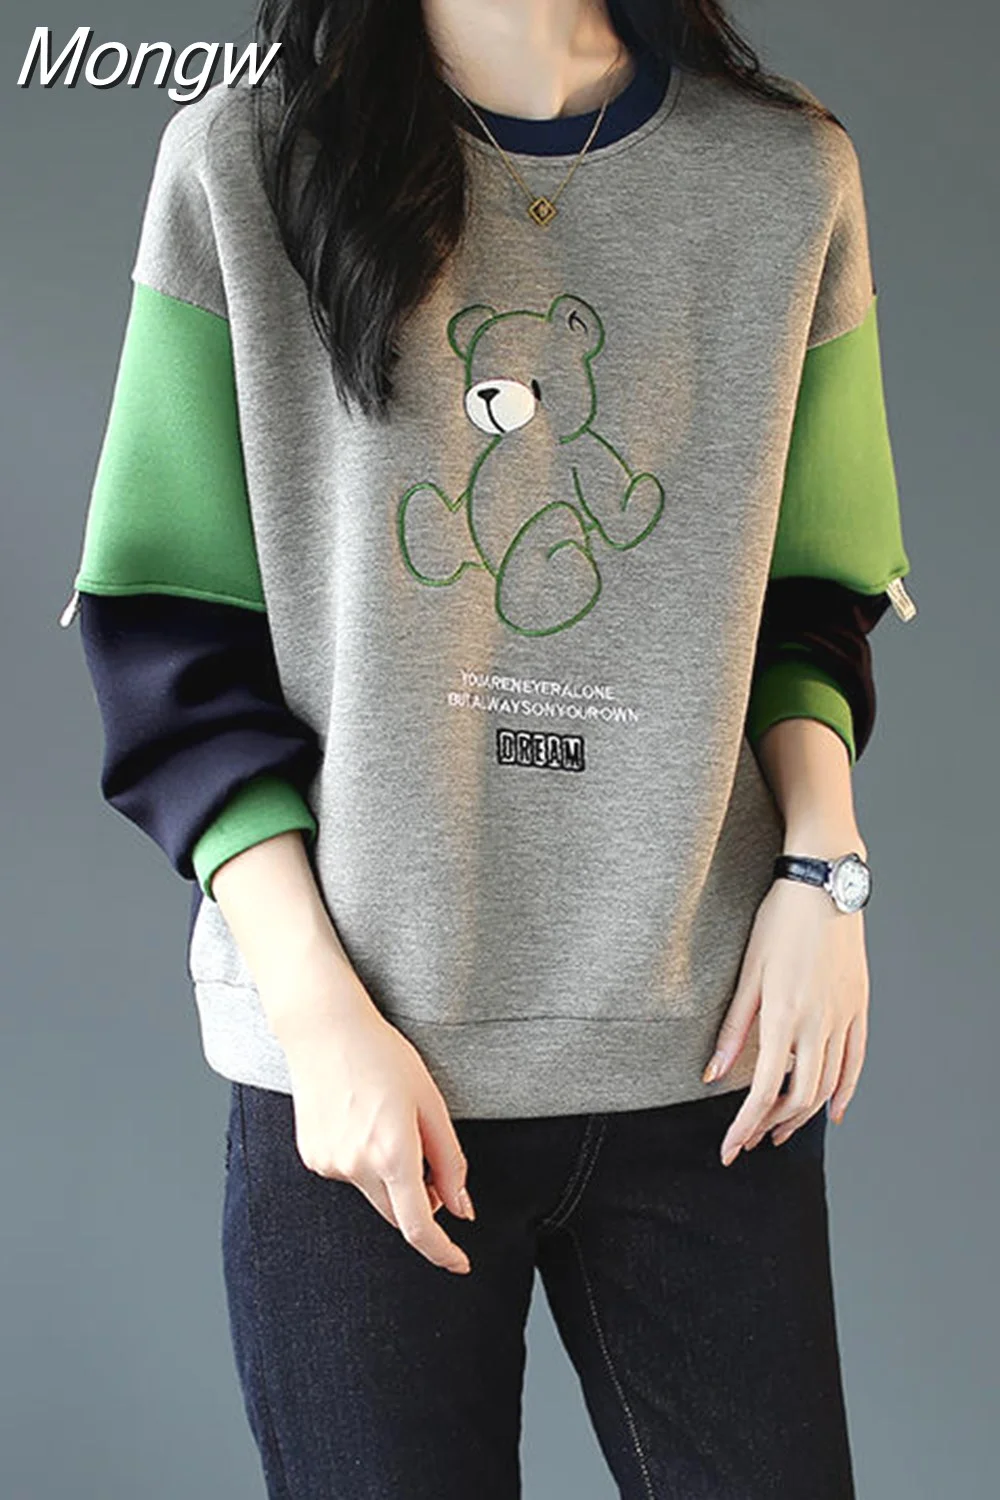 Mongw Embroidery Spliced Warm All-match T-Shirt Female Clothing 2023 Autumn New Loose Casual Pullovers Tops Korean Tee Shirt